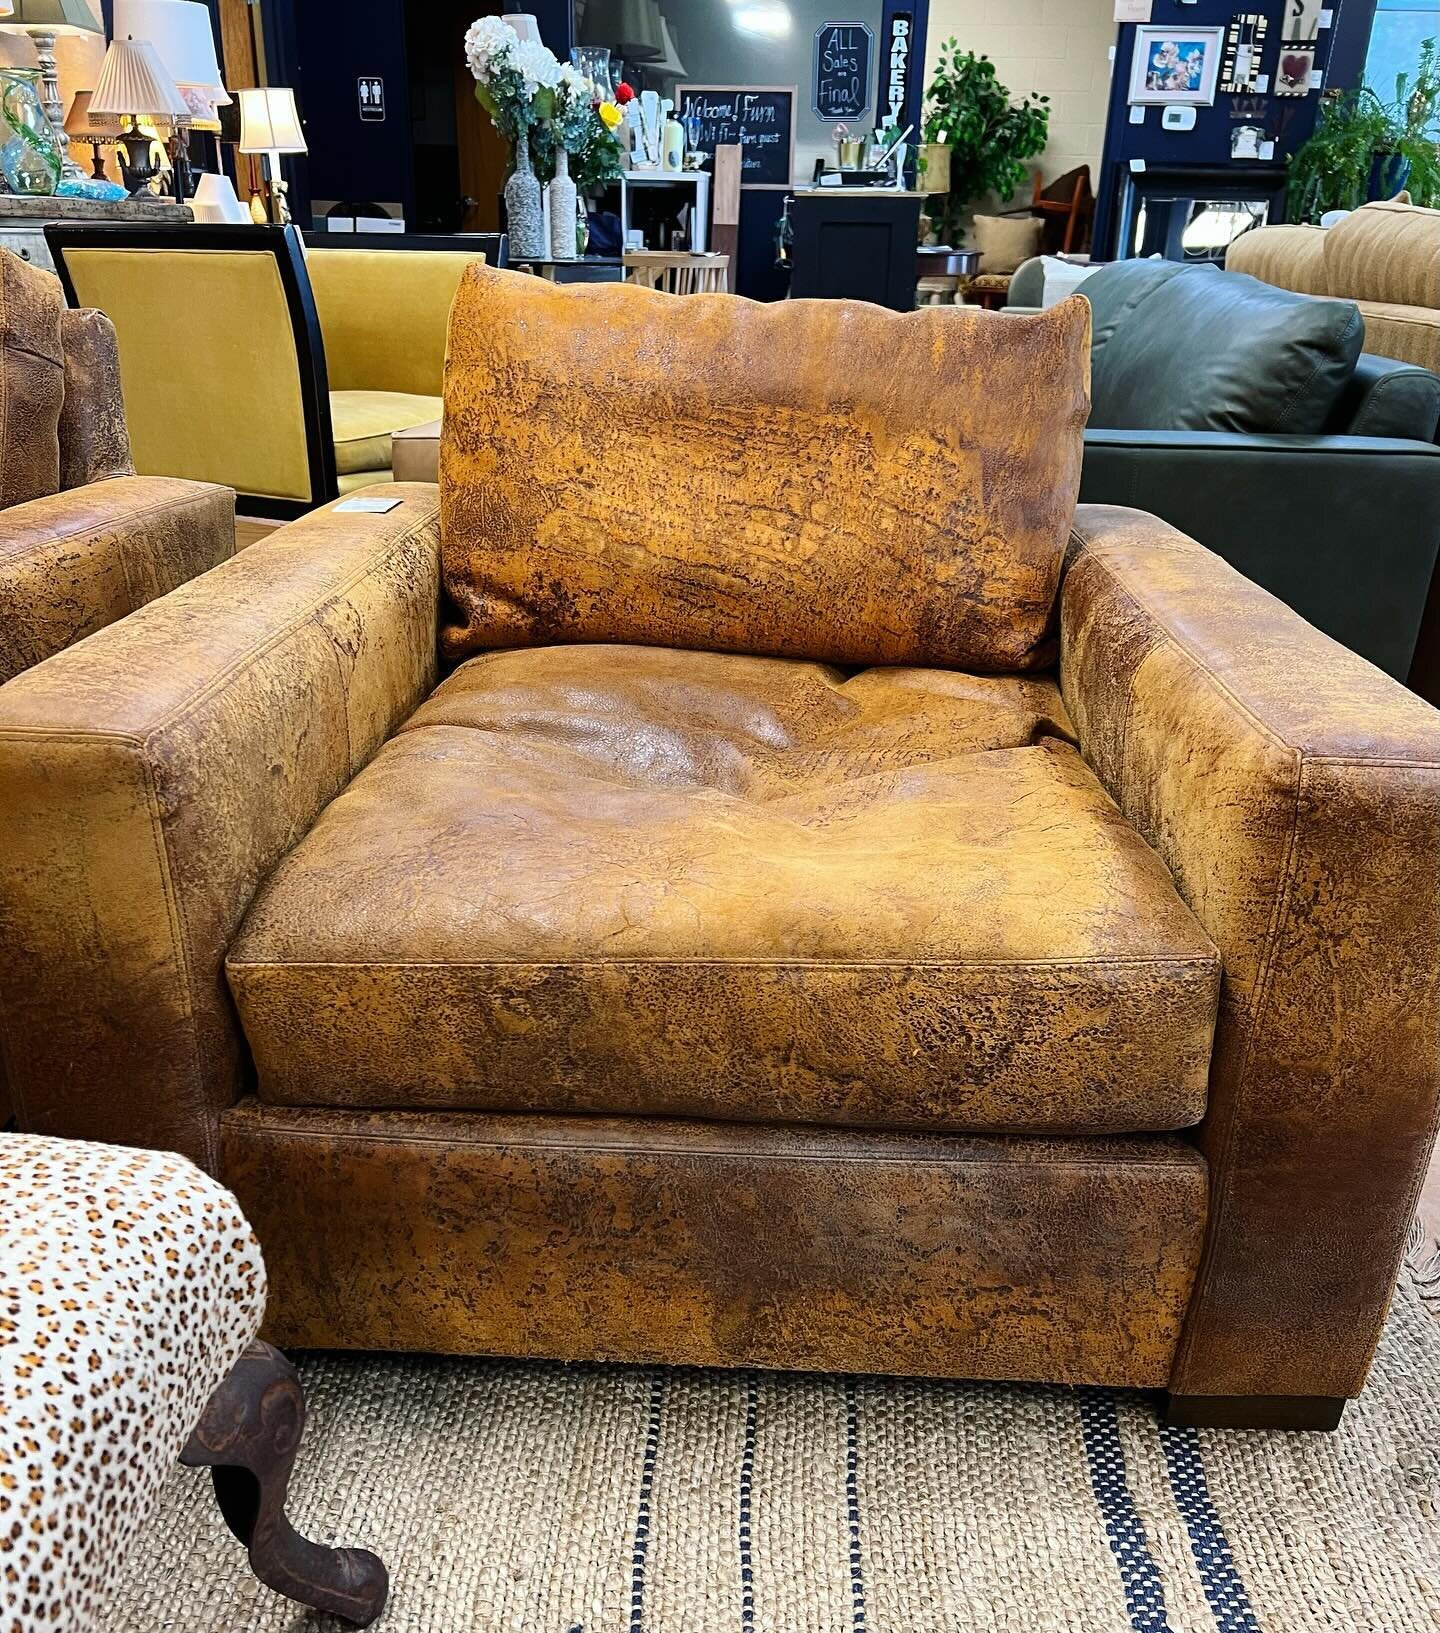 DEEP leather seats from RH&hellip;rustic and absolutely gorgeous!